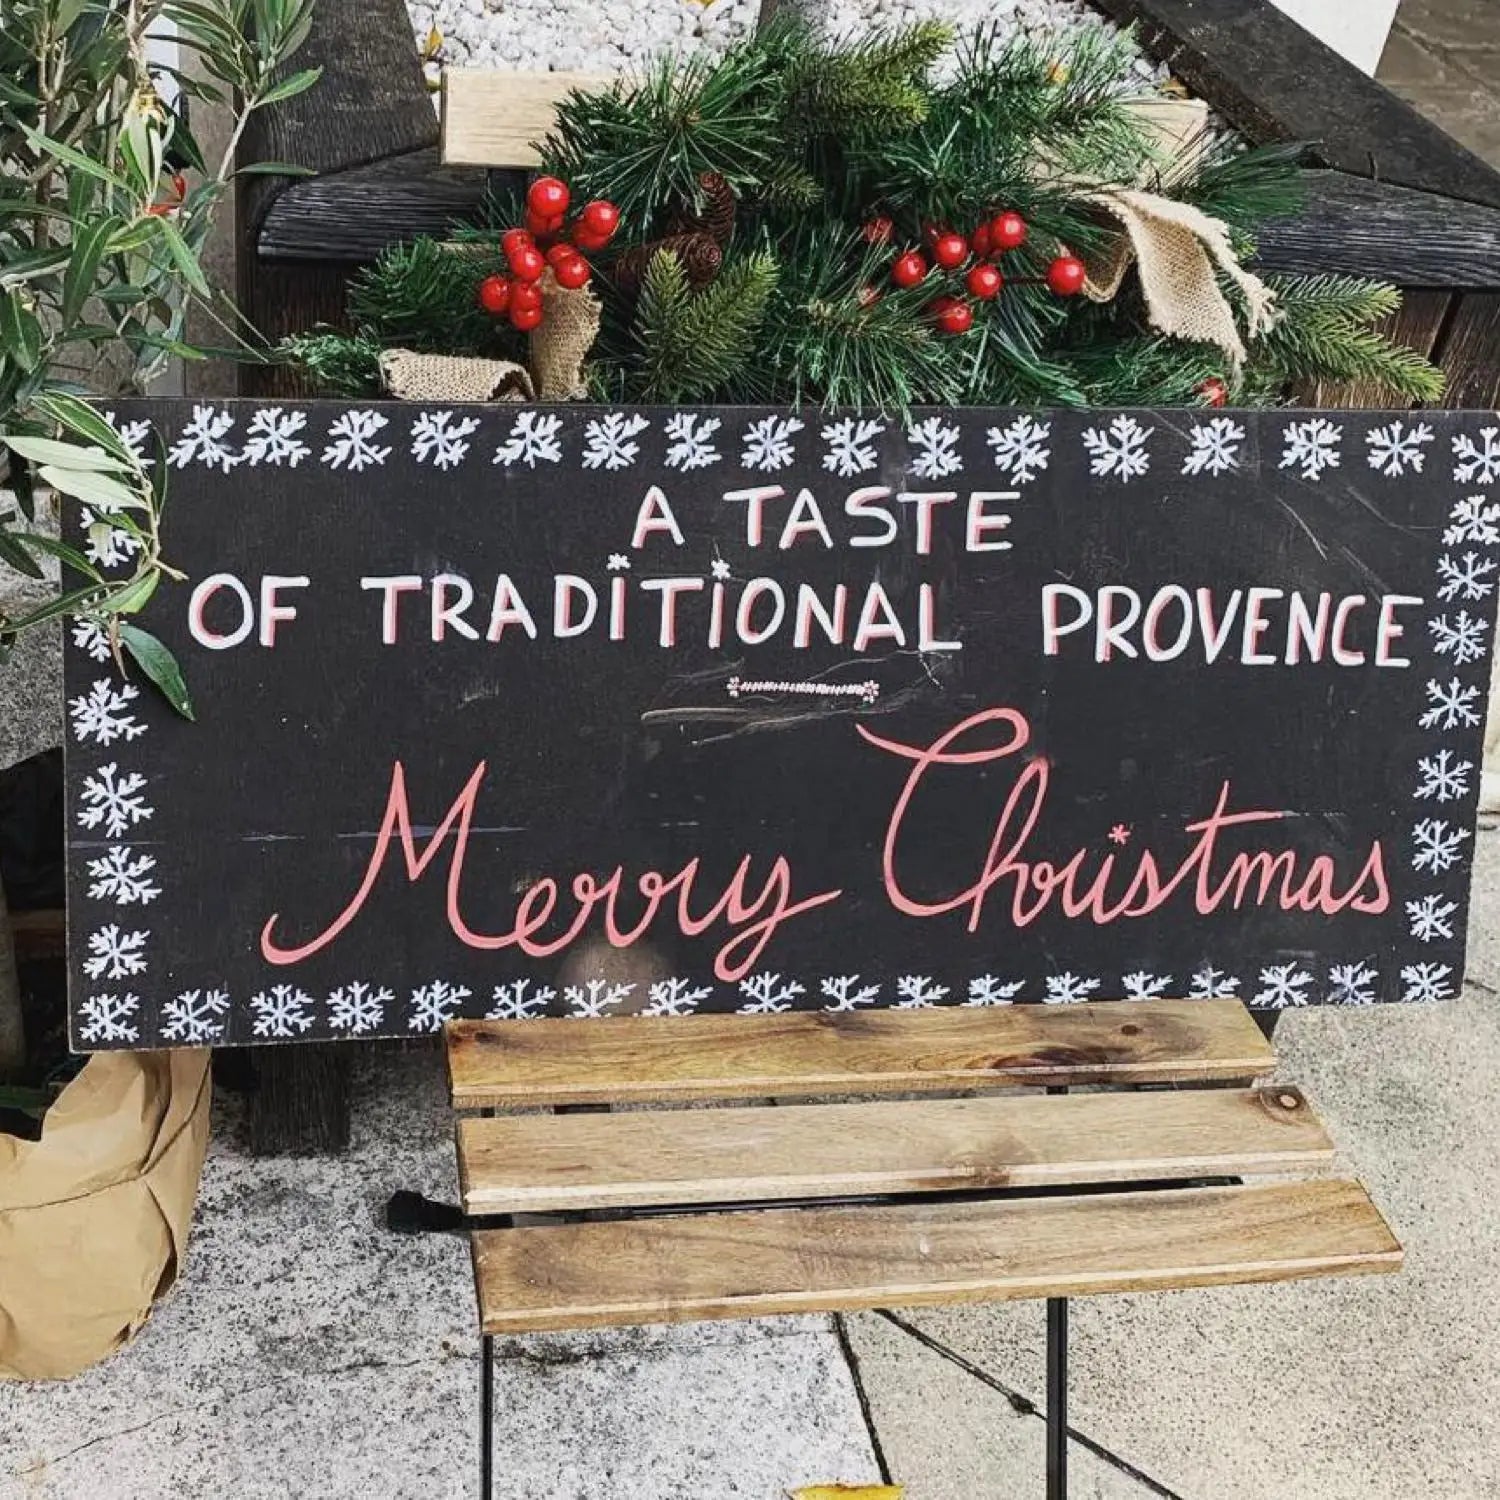 Christmas from Provence to you!